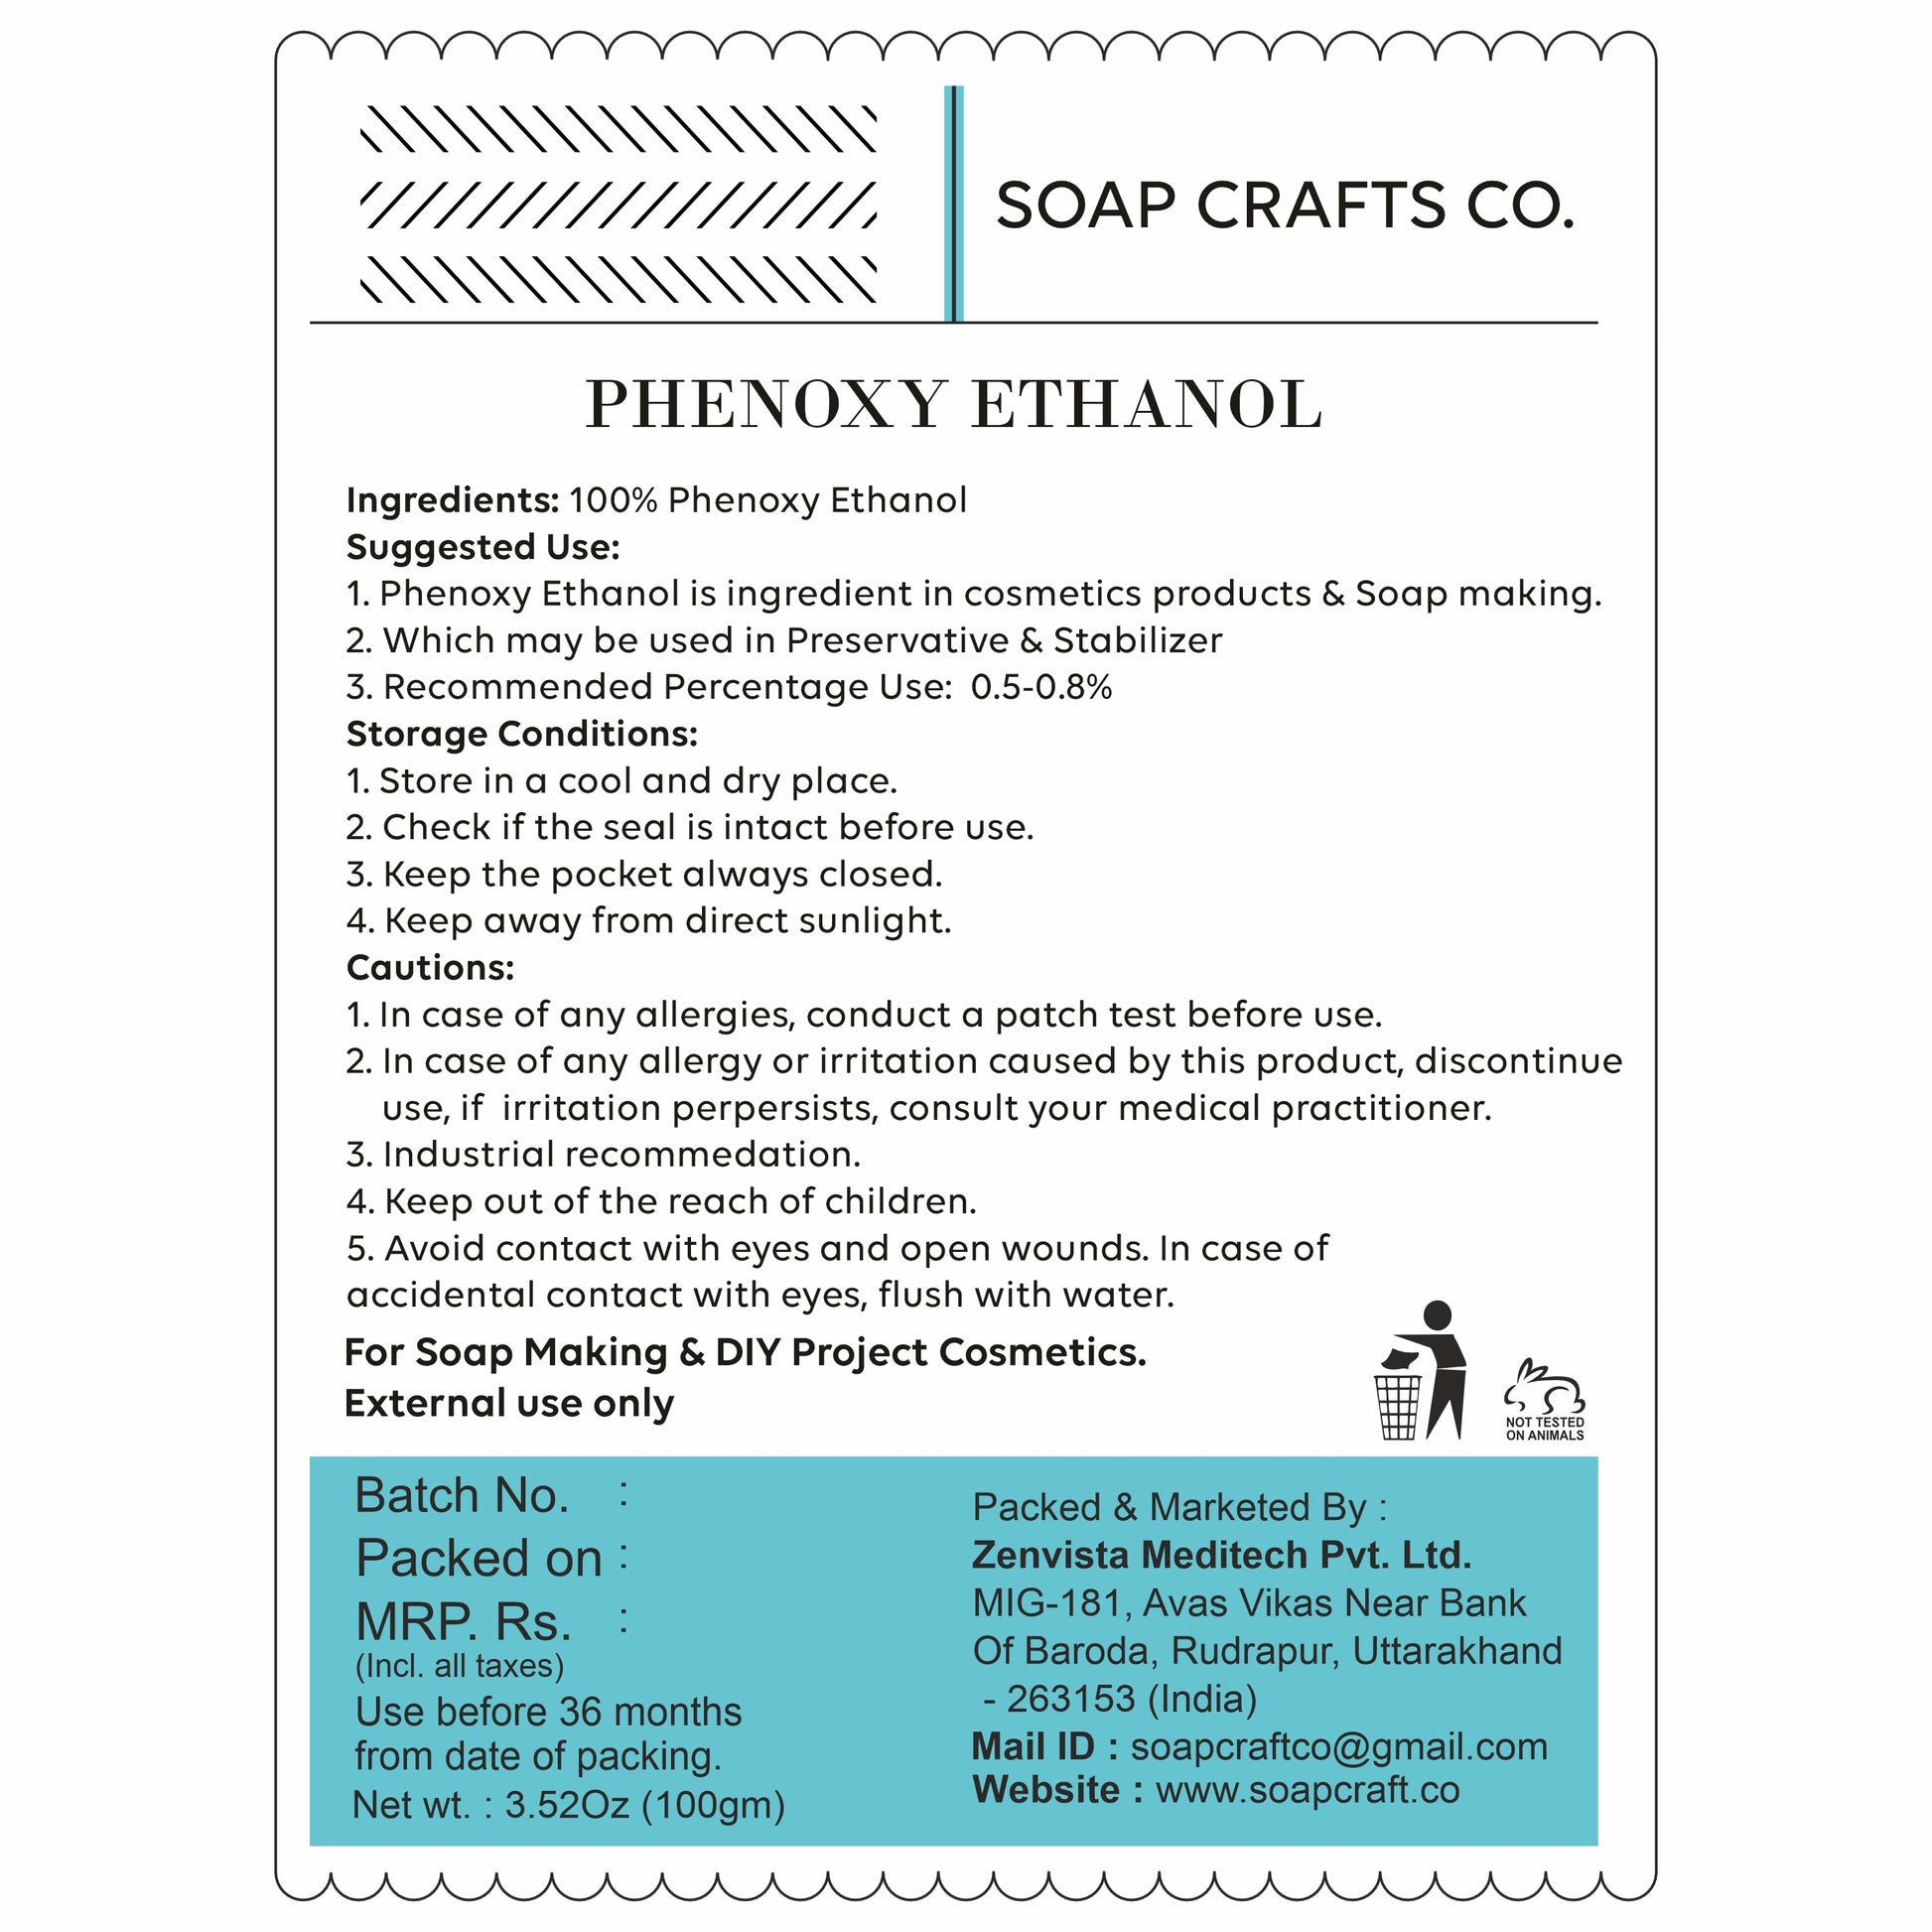 cosmeticmaking, saopmaking, cosmeticmakingingredients, soapmakingingredients,cosmeticingredients,naturalingredients,organicingredients,veganingredients, essentialoils,fragranceoils,carrieroils, carrieroils, butters, clays,botanicals,herbs,preservatives,emulsifiers,surfa ctants,thickeners, thickeners,exfoliants, phenoxy ethanol